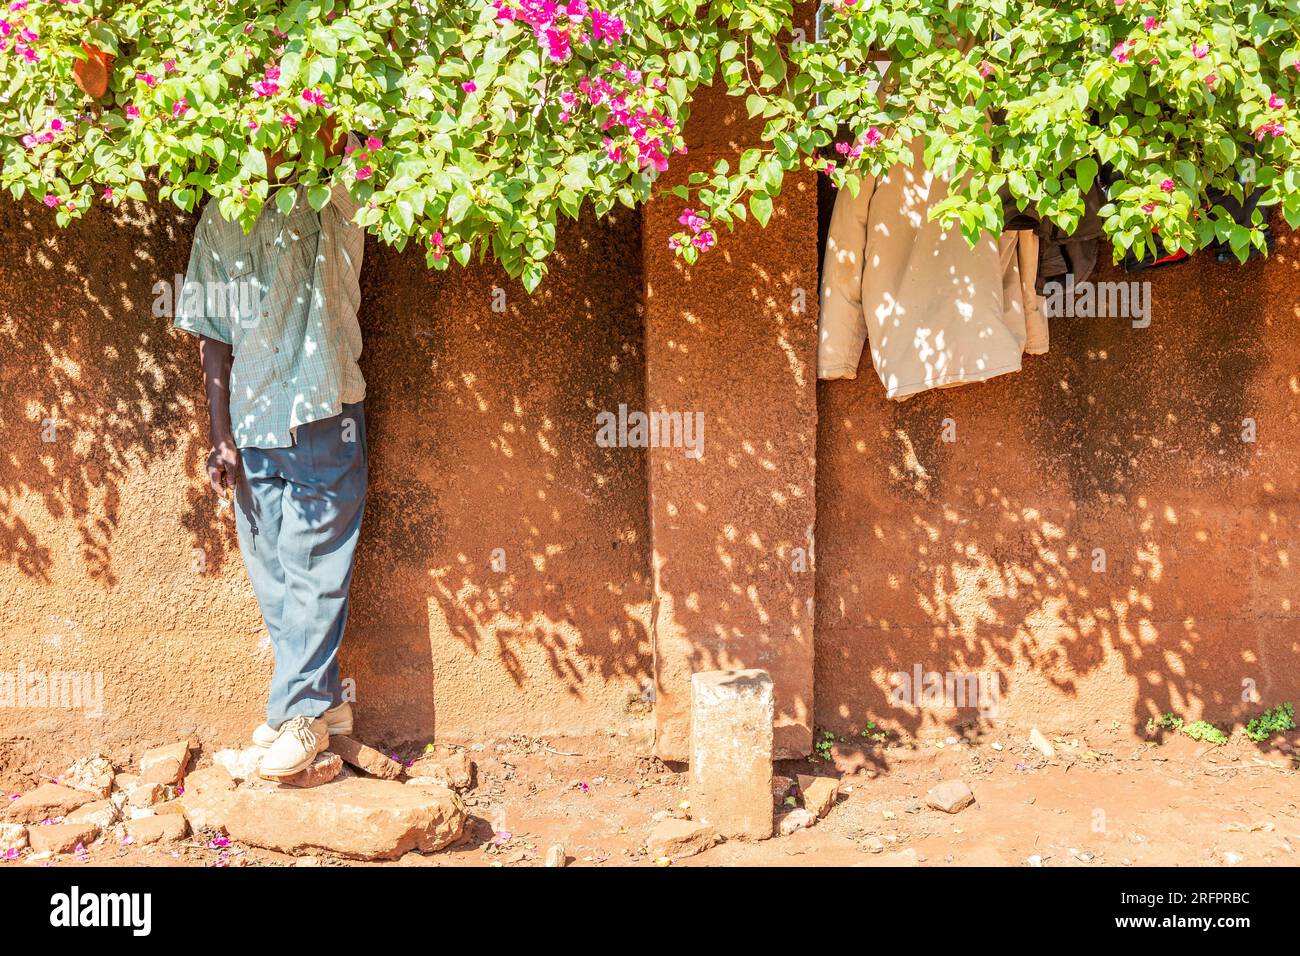 At the foot of an ocher wall, a man stands sheltered from the sun under a flowering bougainvillea. Jinja, Uganda. Stock Photo